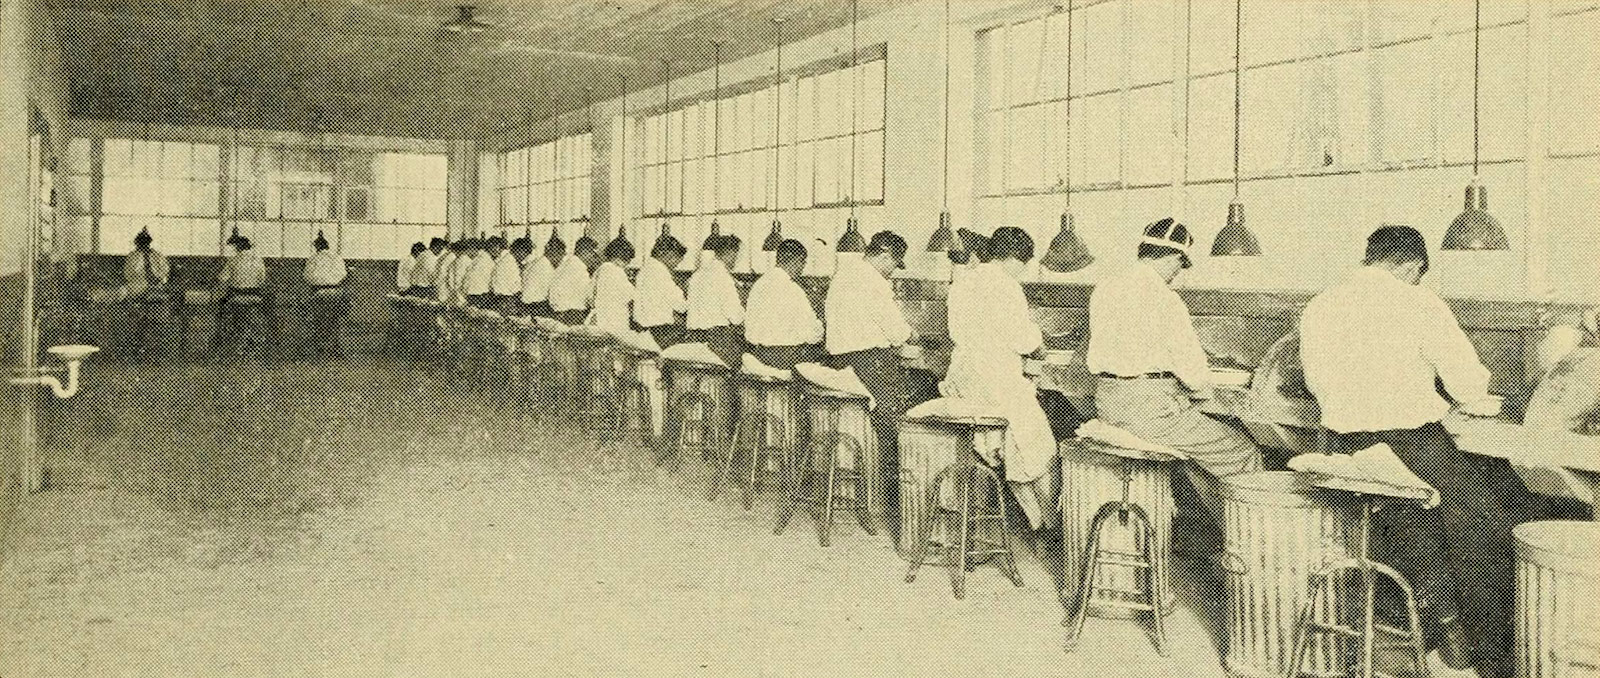 A black and white photo shows a couple of dozen people sitting on stools in front of high counters, shucking oysters.